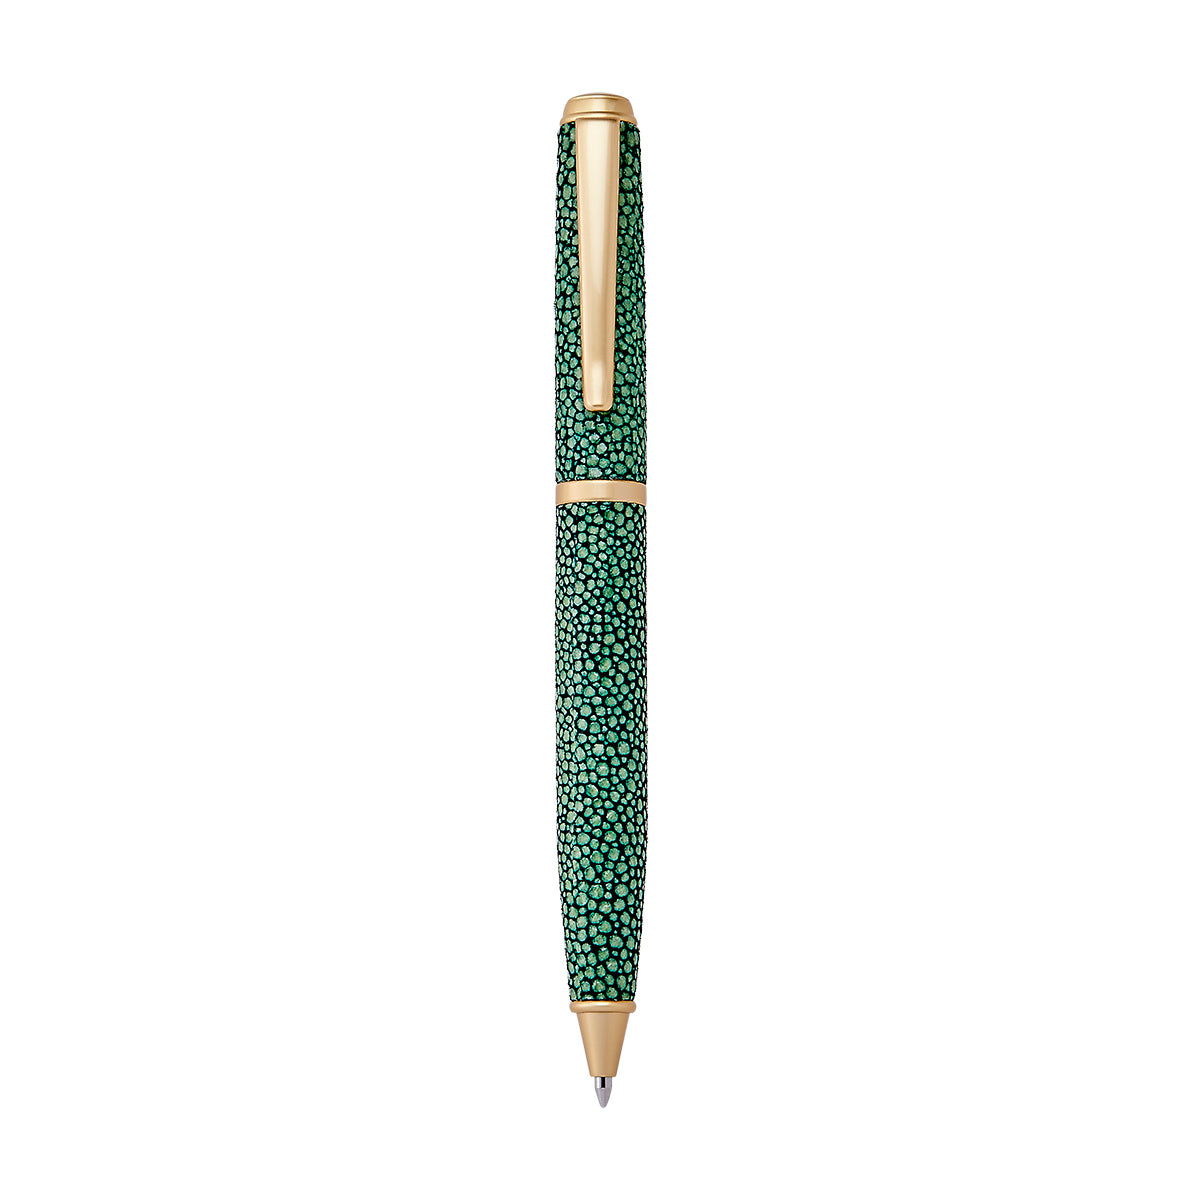 Graphic Image Leather Wrapped Pen Emerald Pebble Shagreen Leather